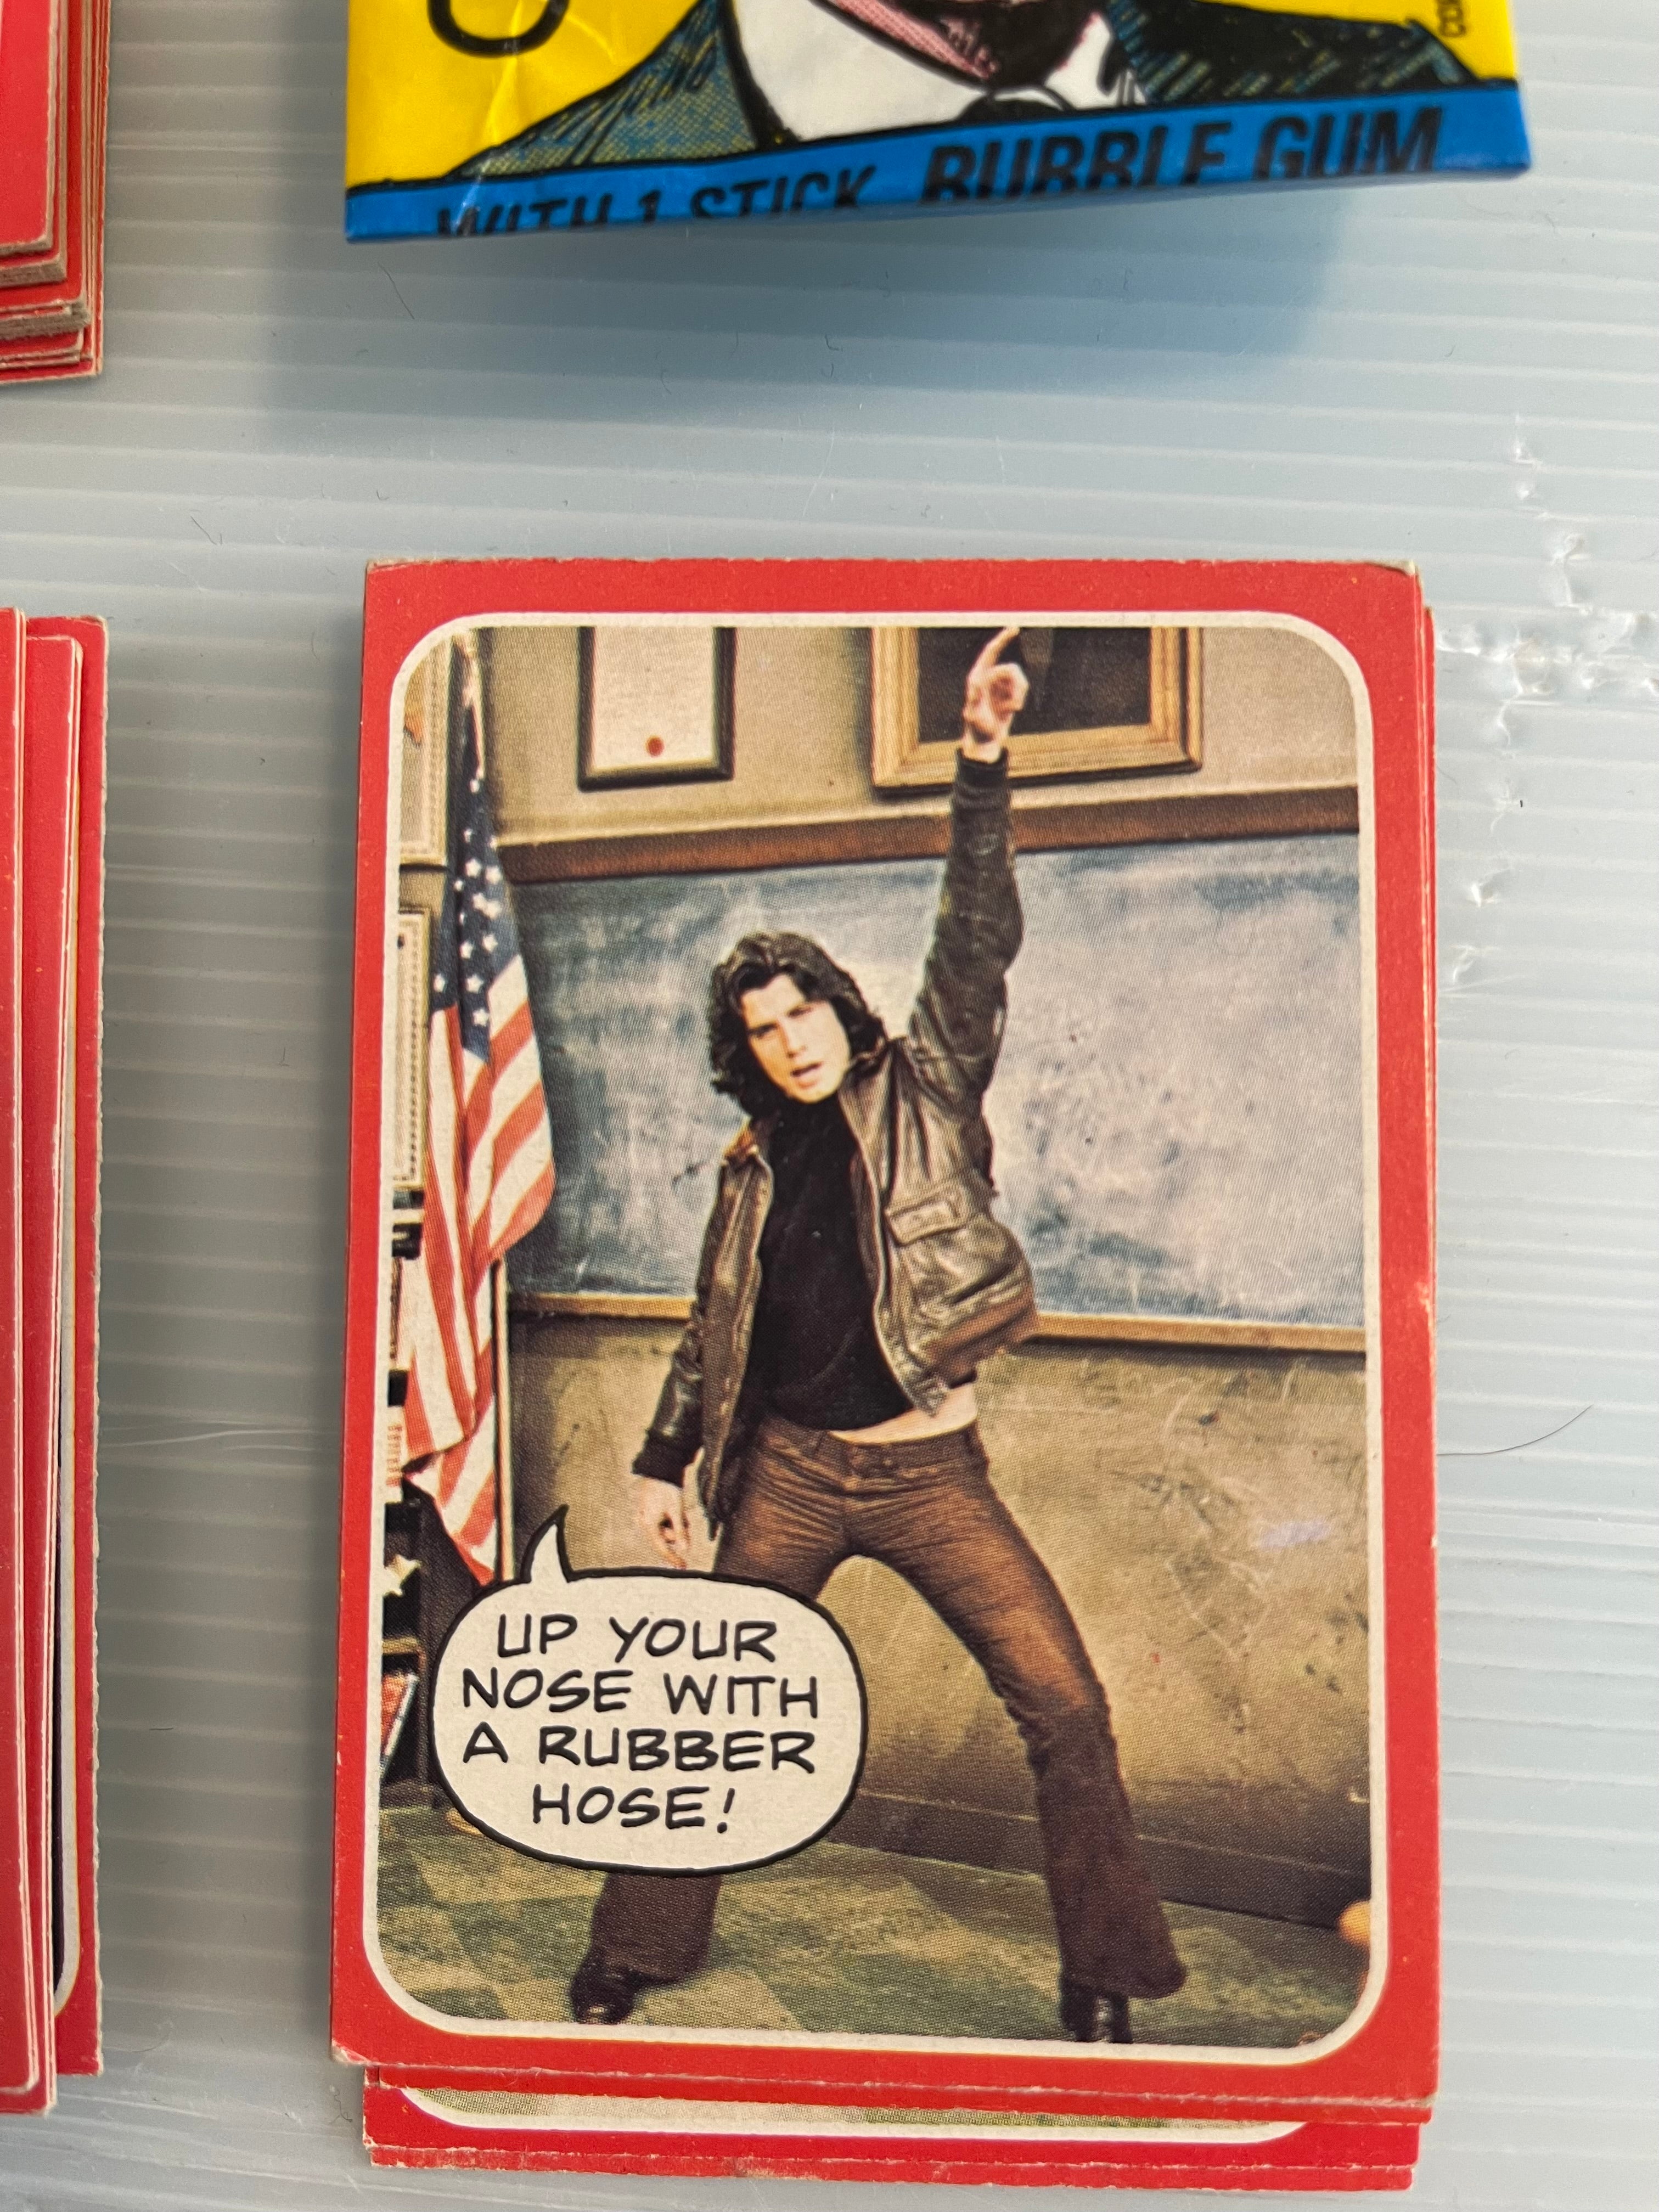 Welcome Back Kotter TV show opc Canadian cards set with wrapper 1976